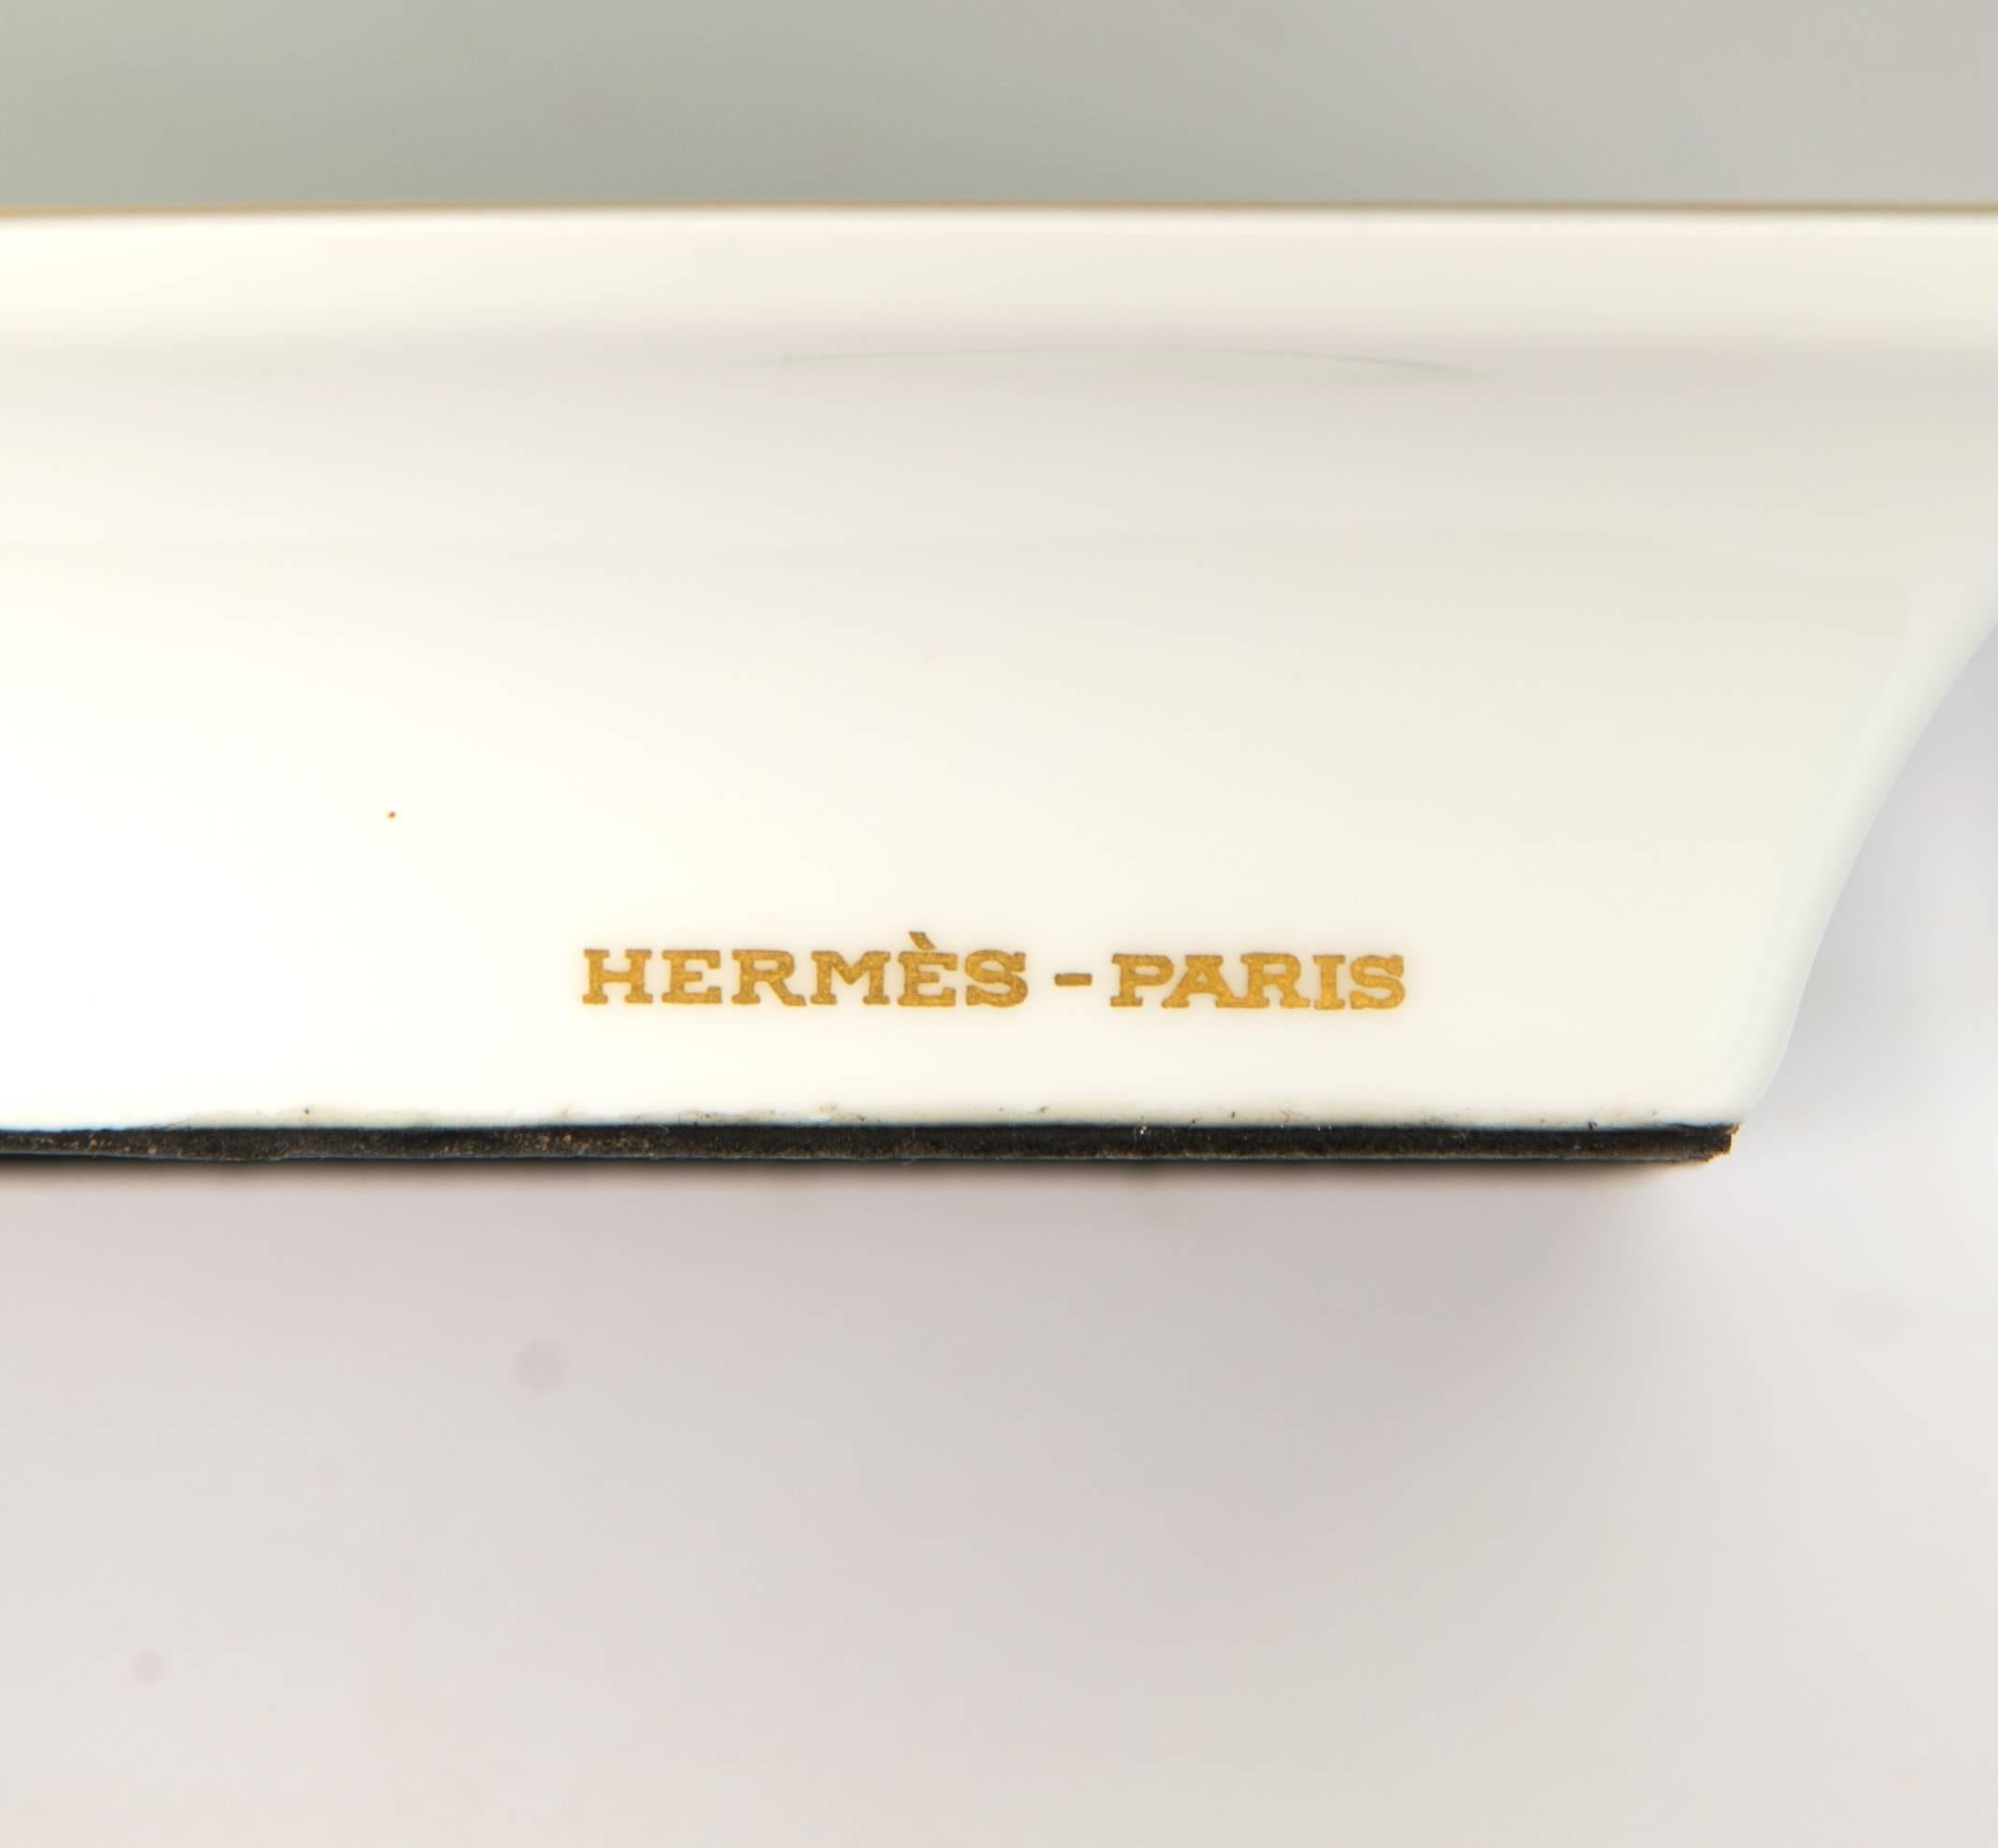 French Hermès Paris Ashtray with Horses by LeDoux, France